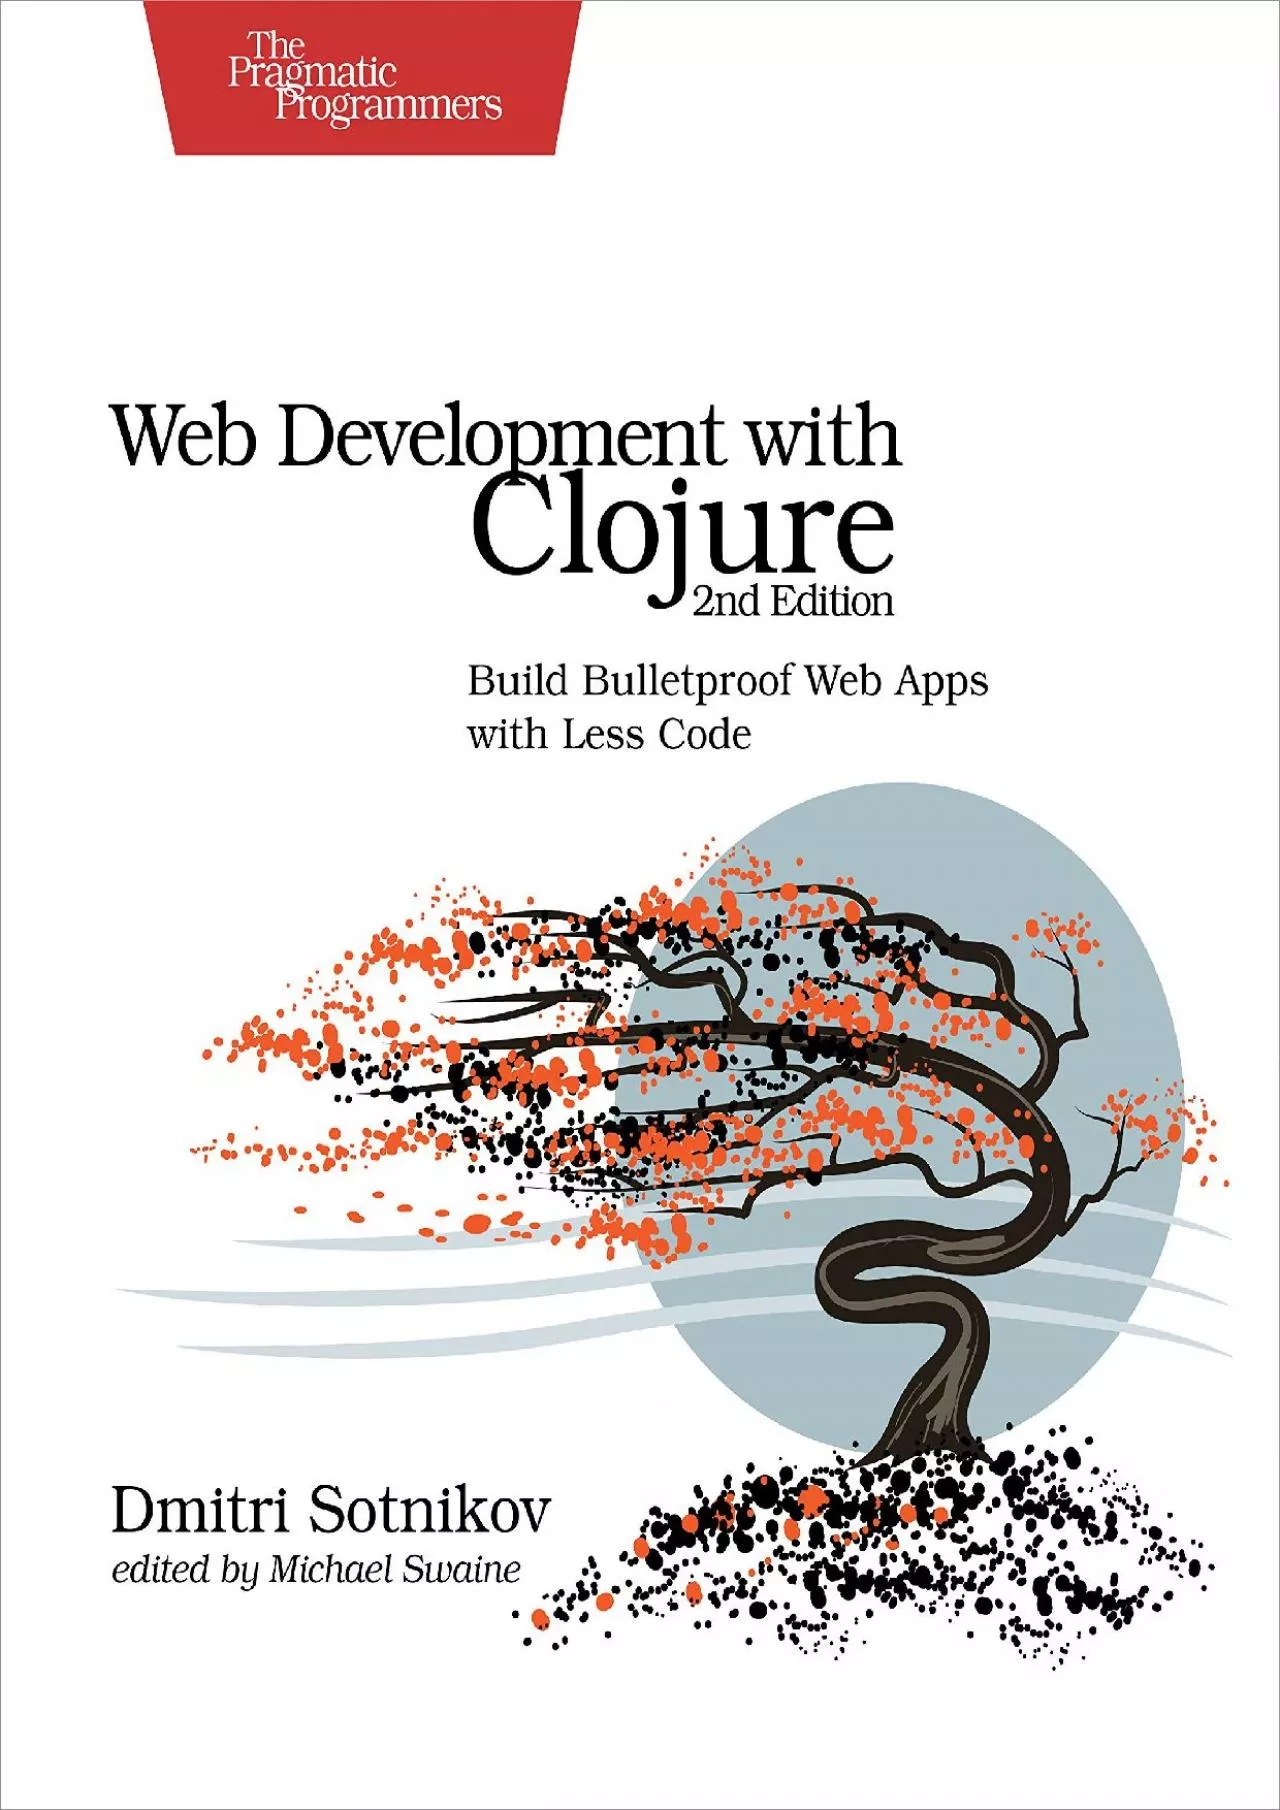 [READ]-Web Development with Clojure Build Bulletproof Web Apps with Less Code